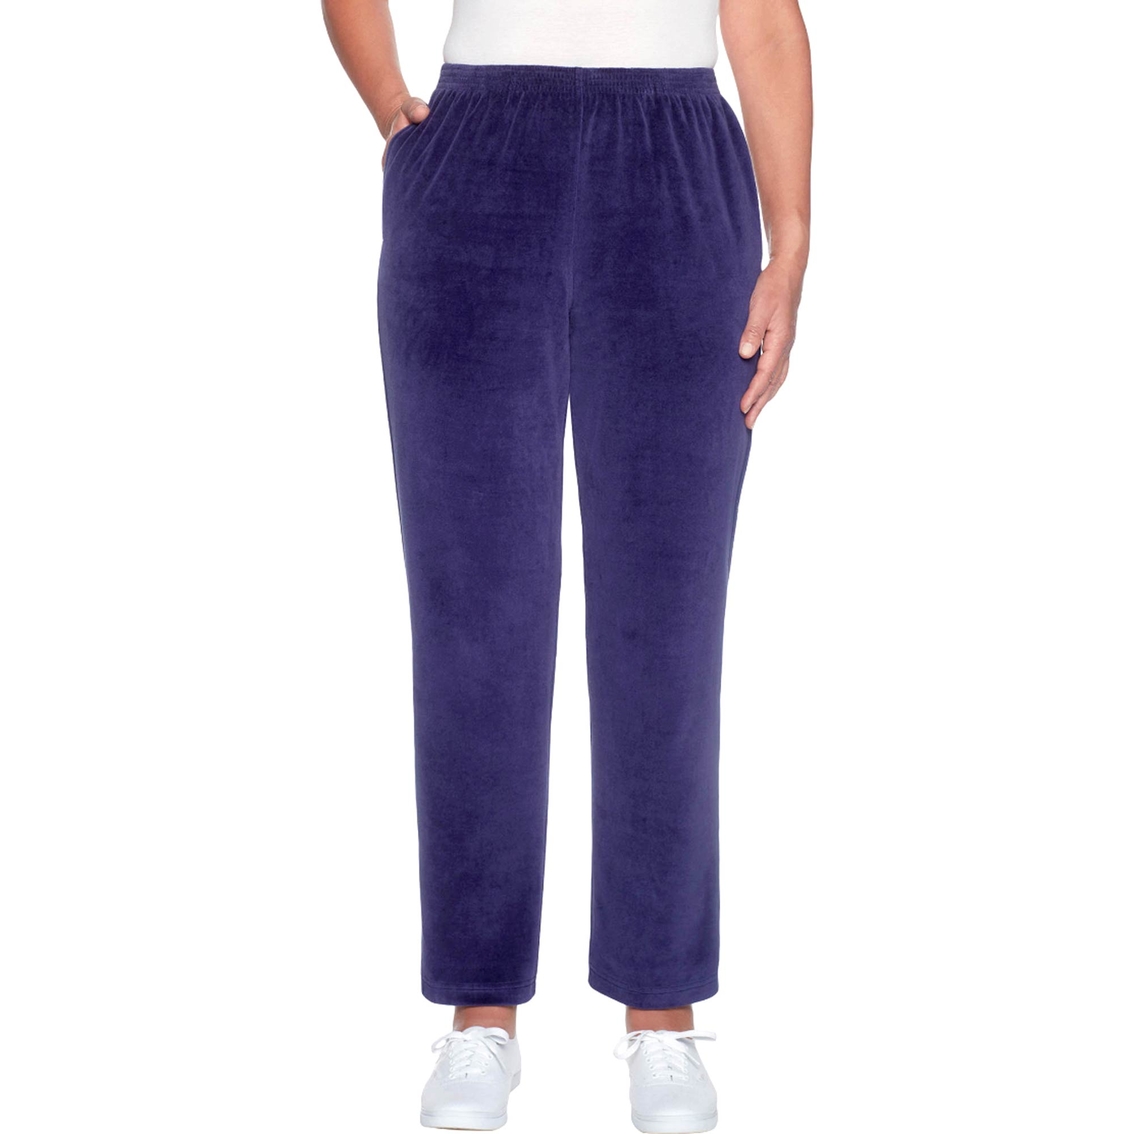 Alfred Dunner Proportioned Medium Pants | Pants | Clothing ...